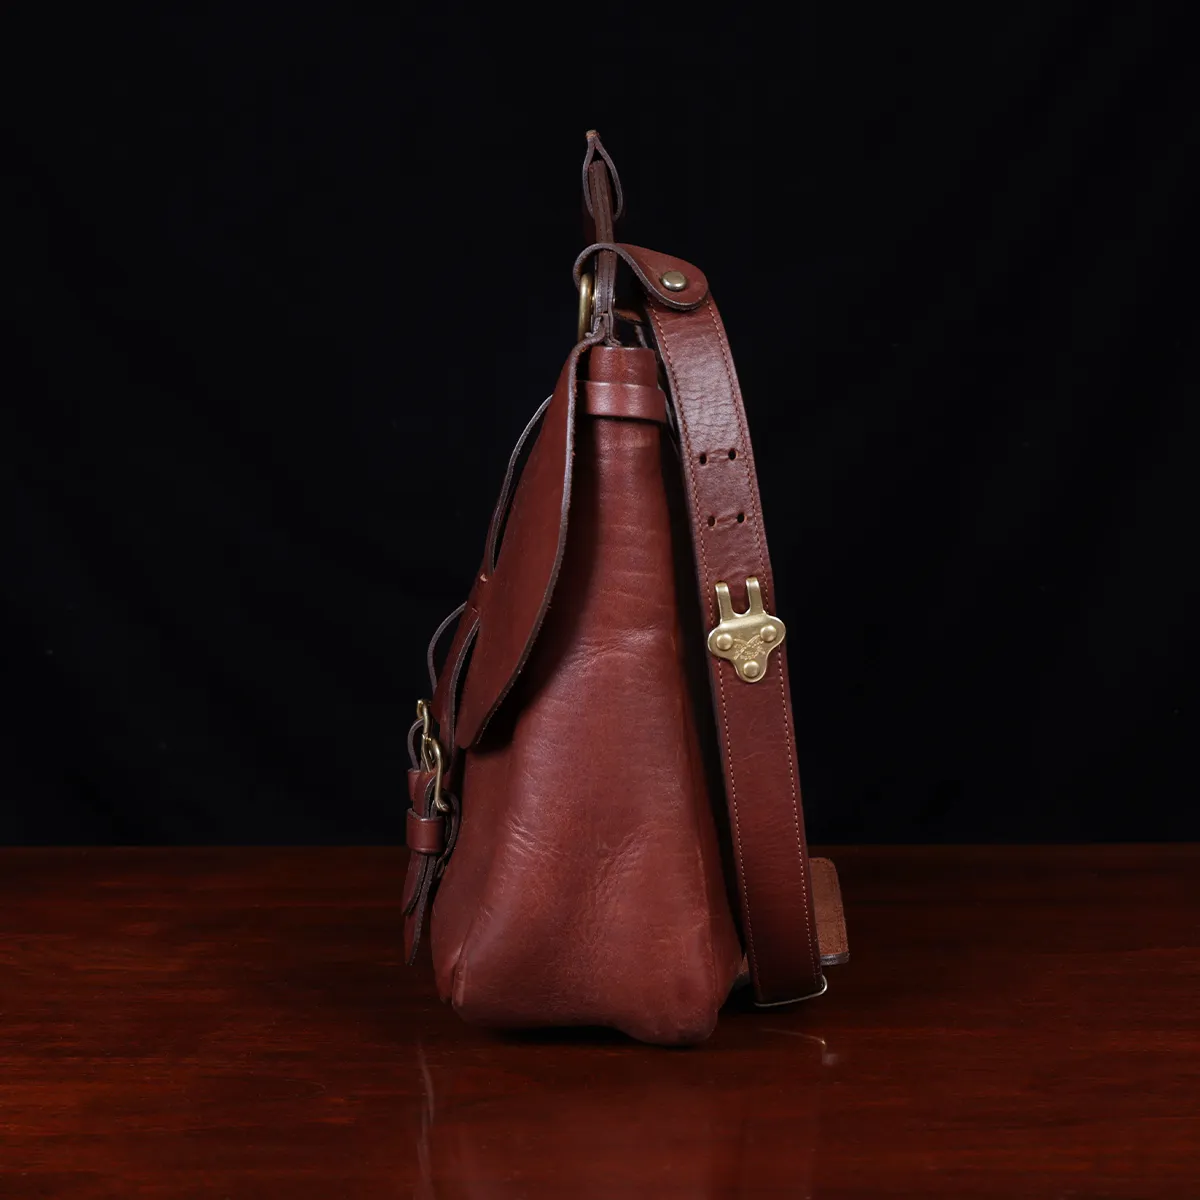 No. 1 Saddlebag Briefcase on a wooden table with a dark background - left side view